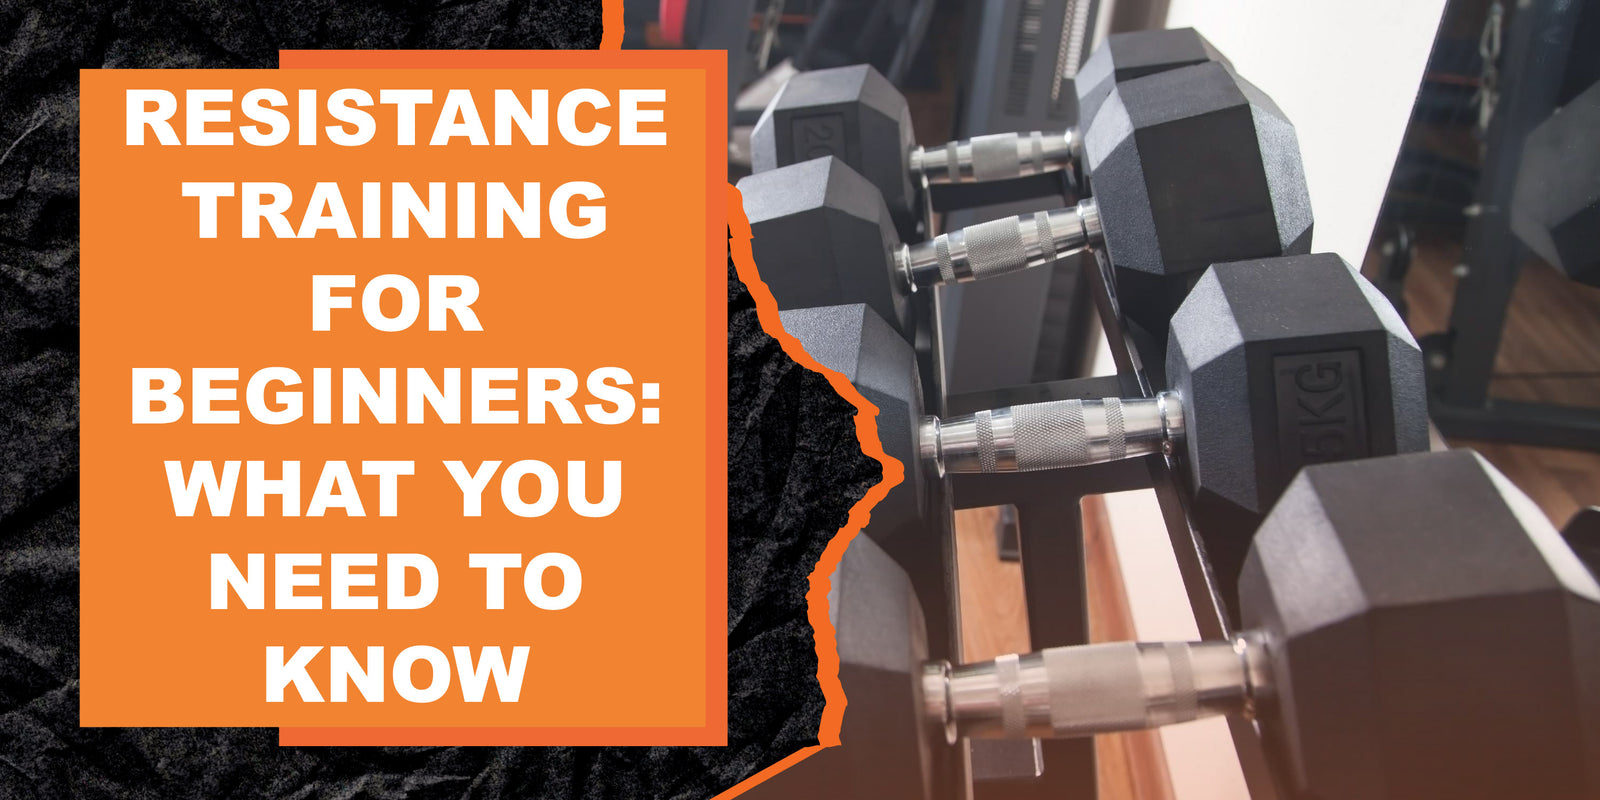 What is resistance training? All you need to know before you start